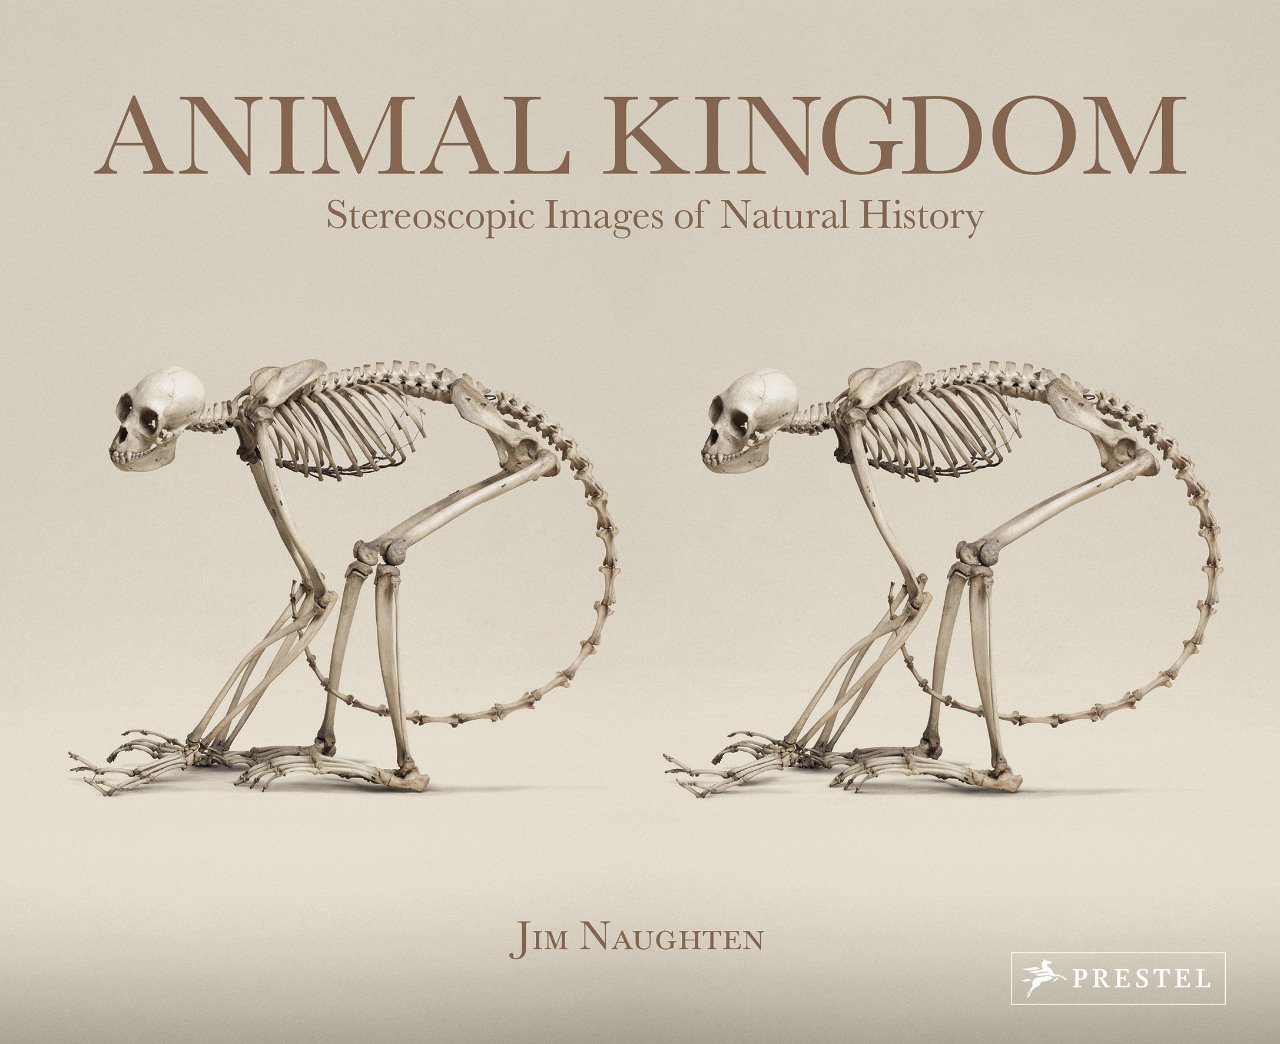 Animal Kingdom : Stereoscopic Images of Natural History, ISBN:  9783791382470 - available from Nationwide Book Distributors Ltd NZ.